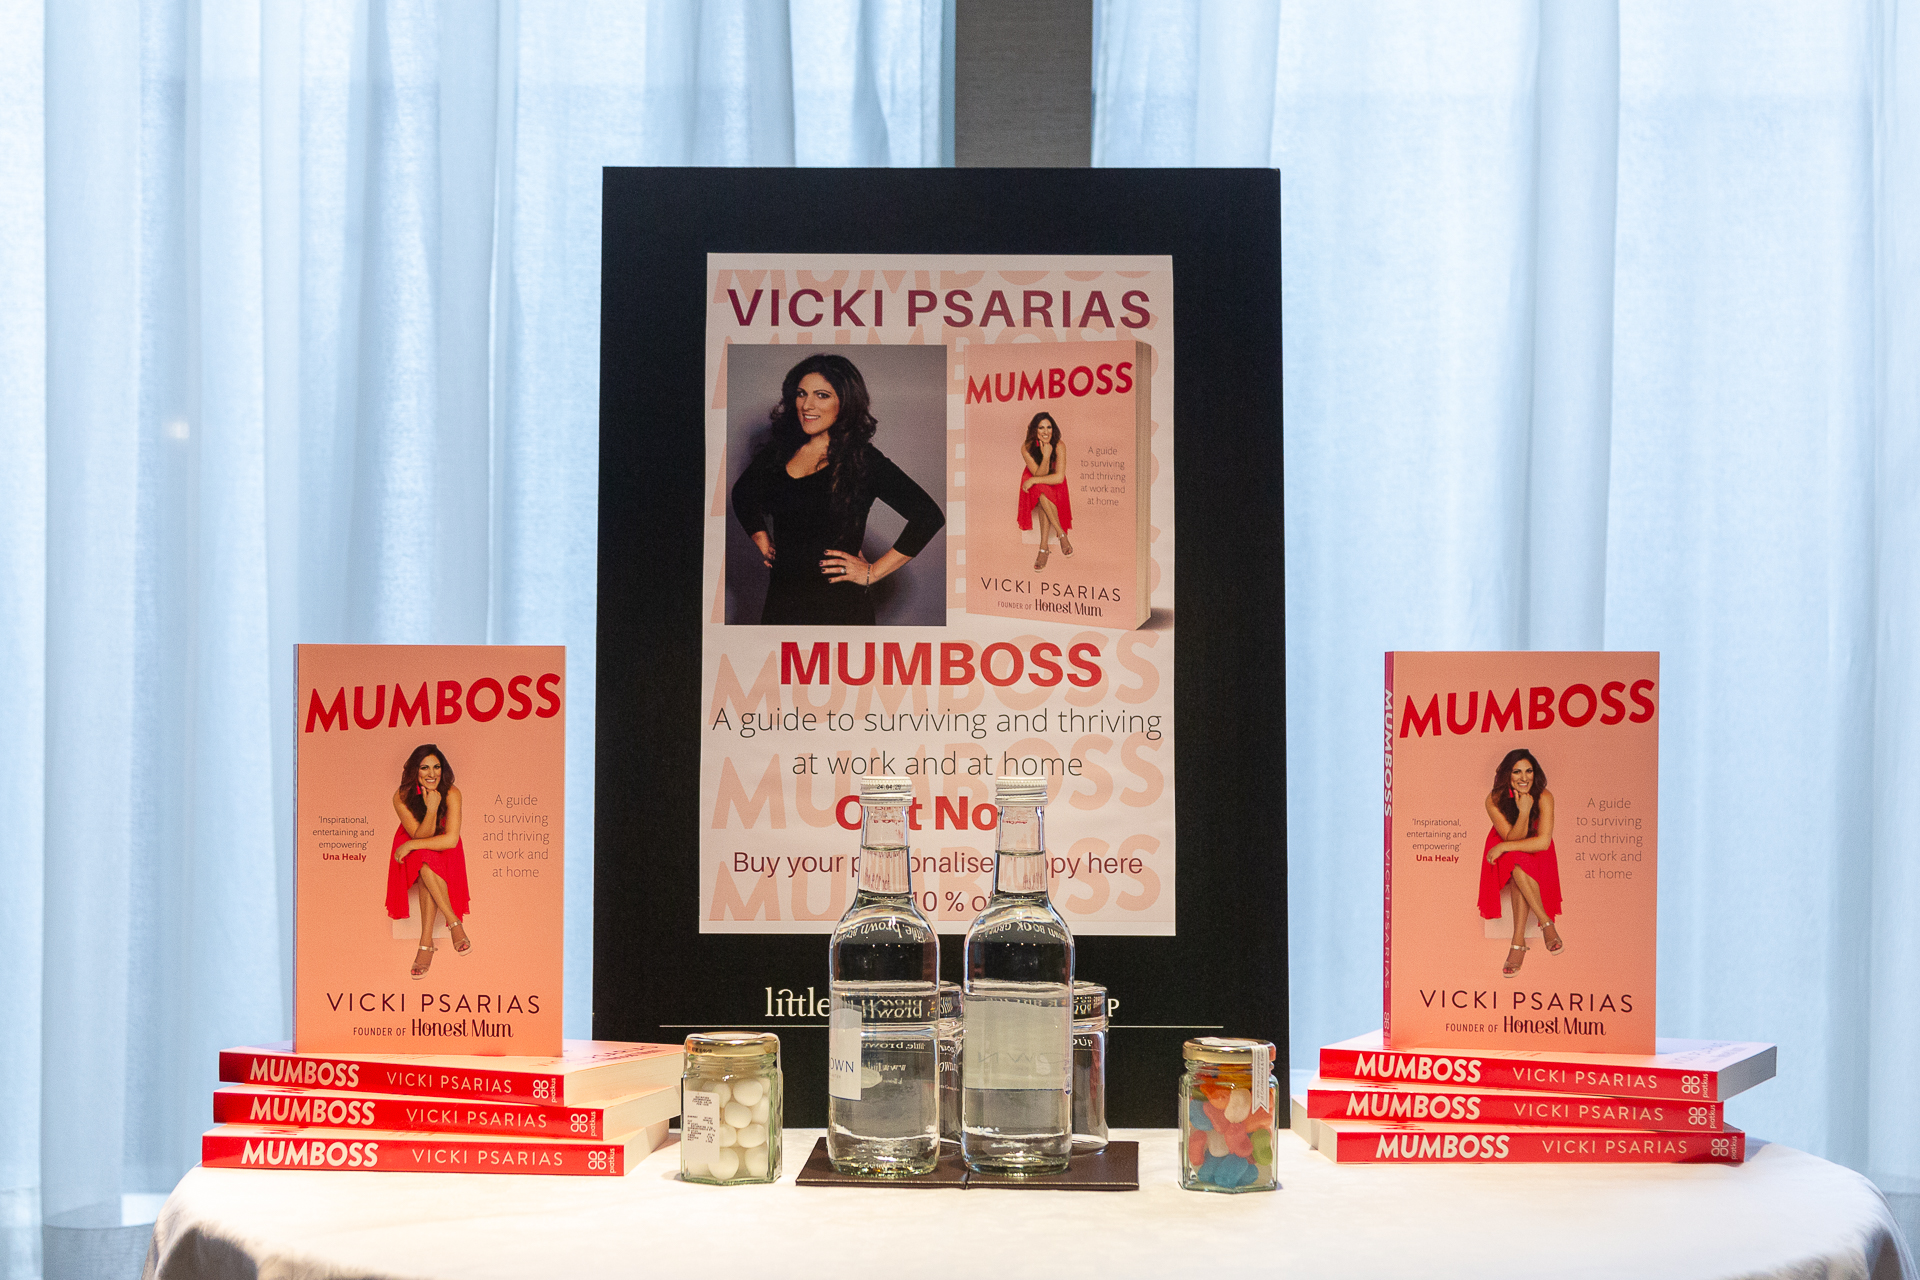 Mumboss book launch party at The Royal Garden Hotel 